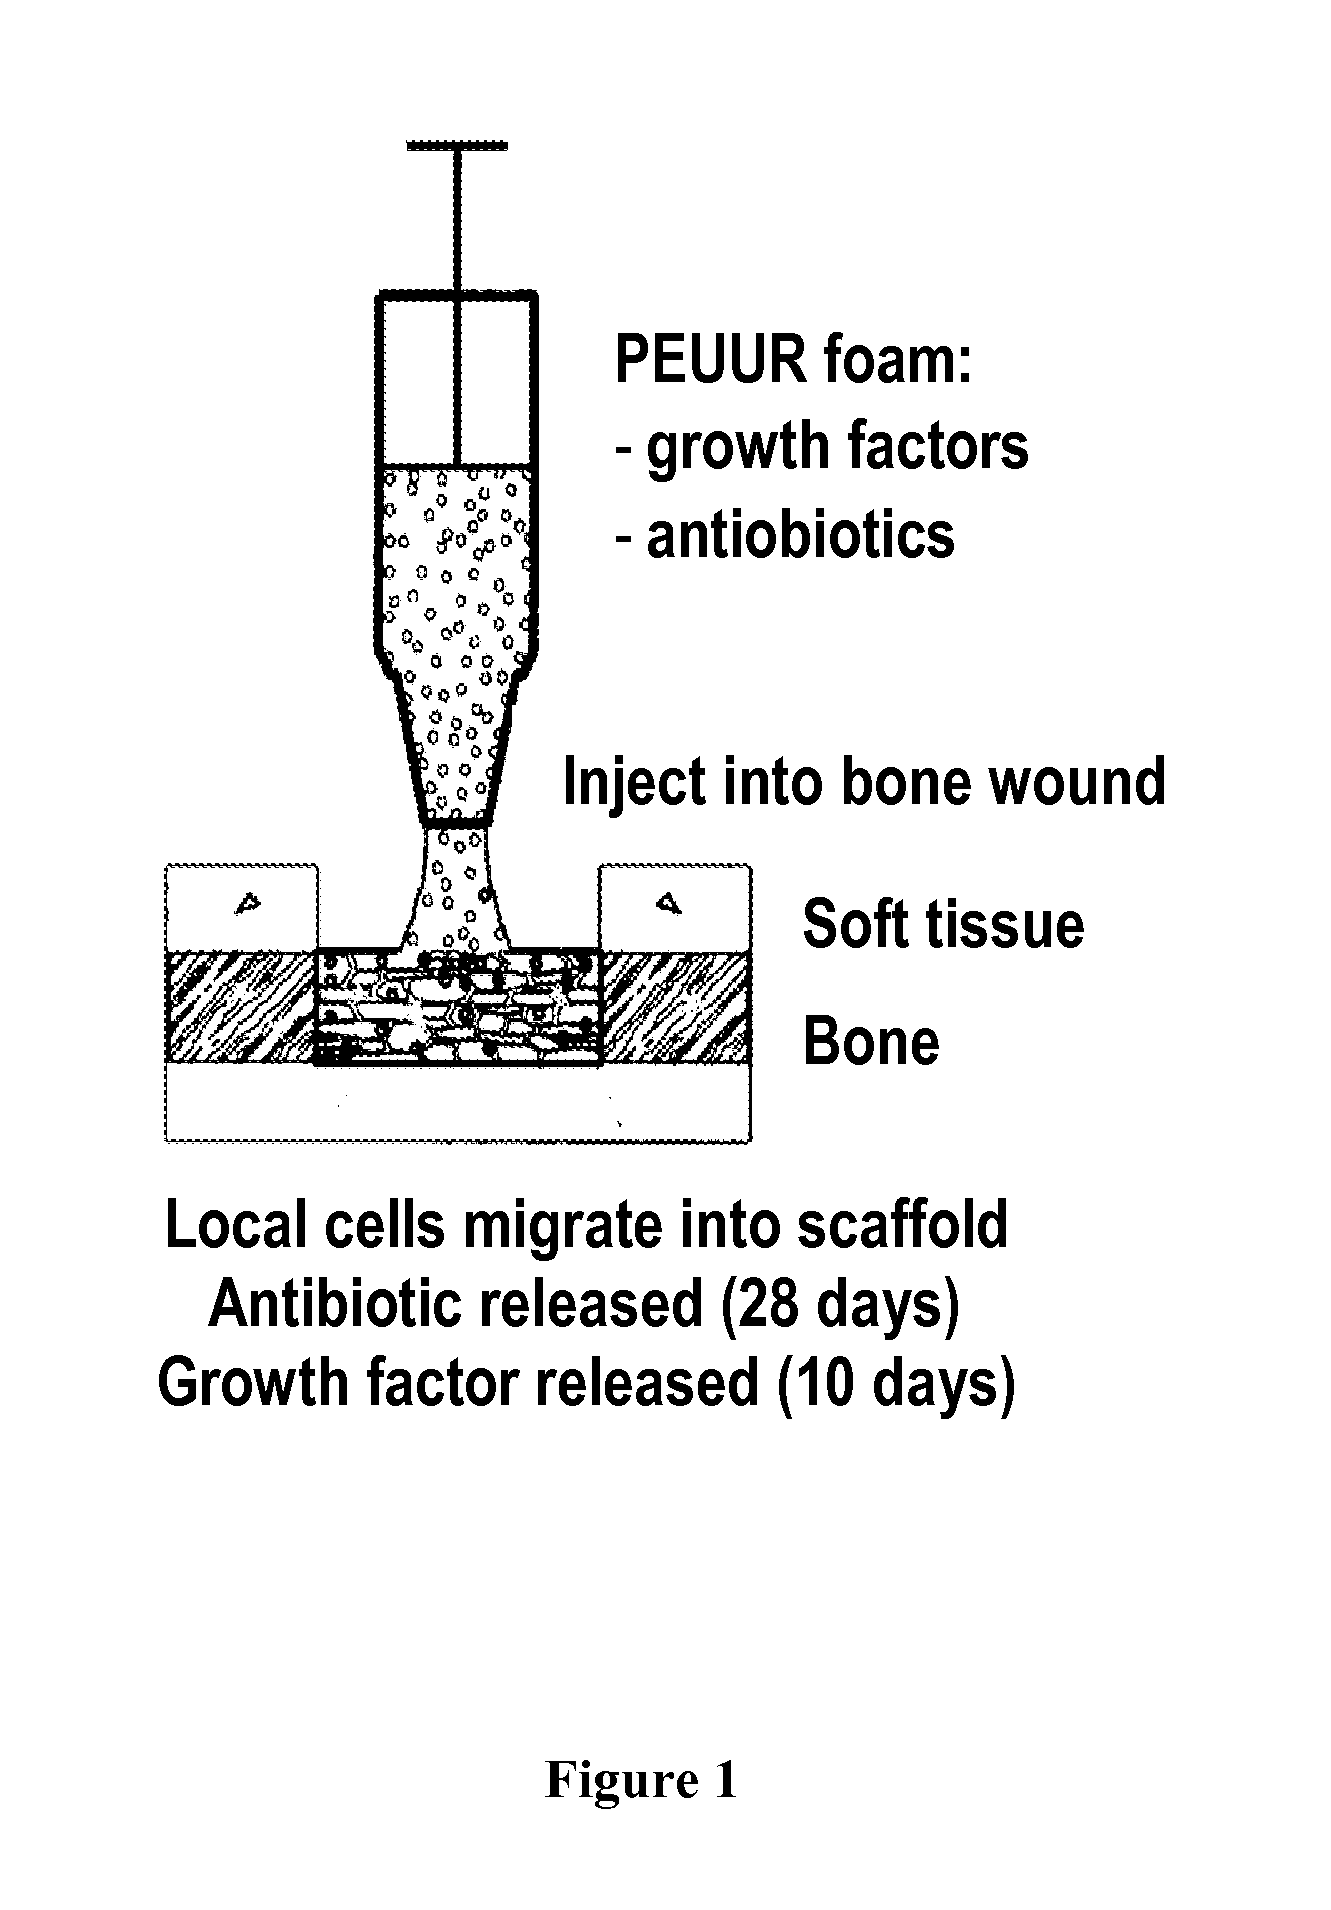 Release of antibiotic from injectable, biodegradable polyurethane scaffolds for enhanced bone fracture healing